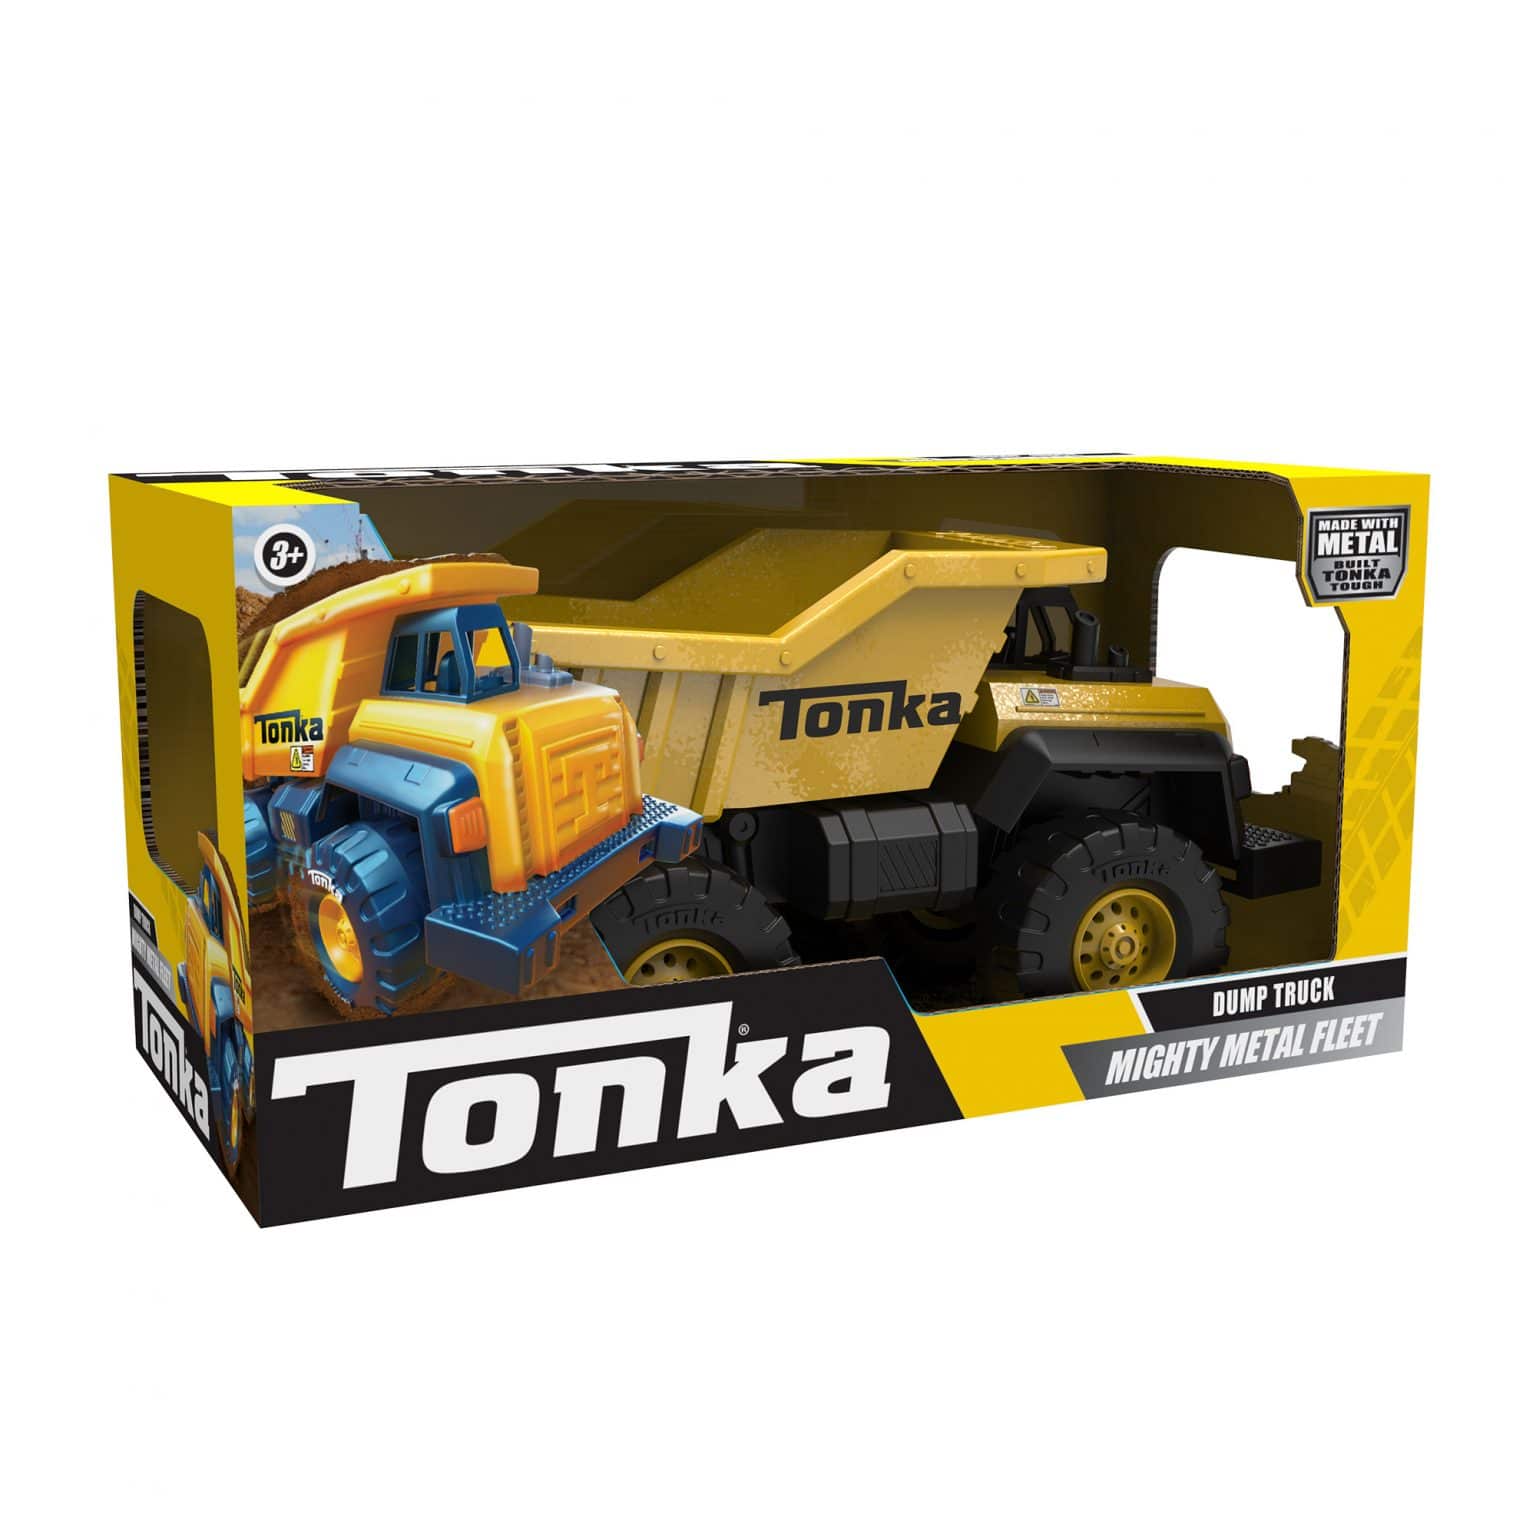 Front view of the yellow Tonka Mighty Metals Fleet in box.